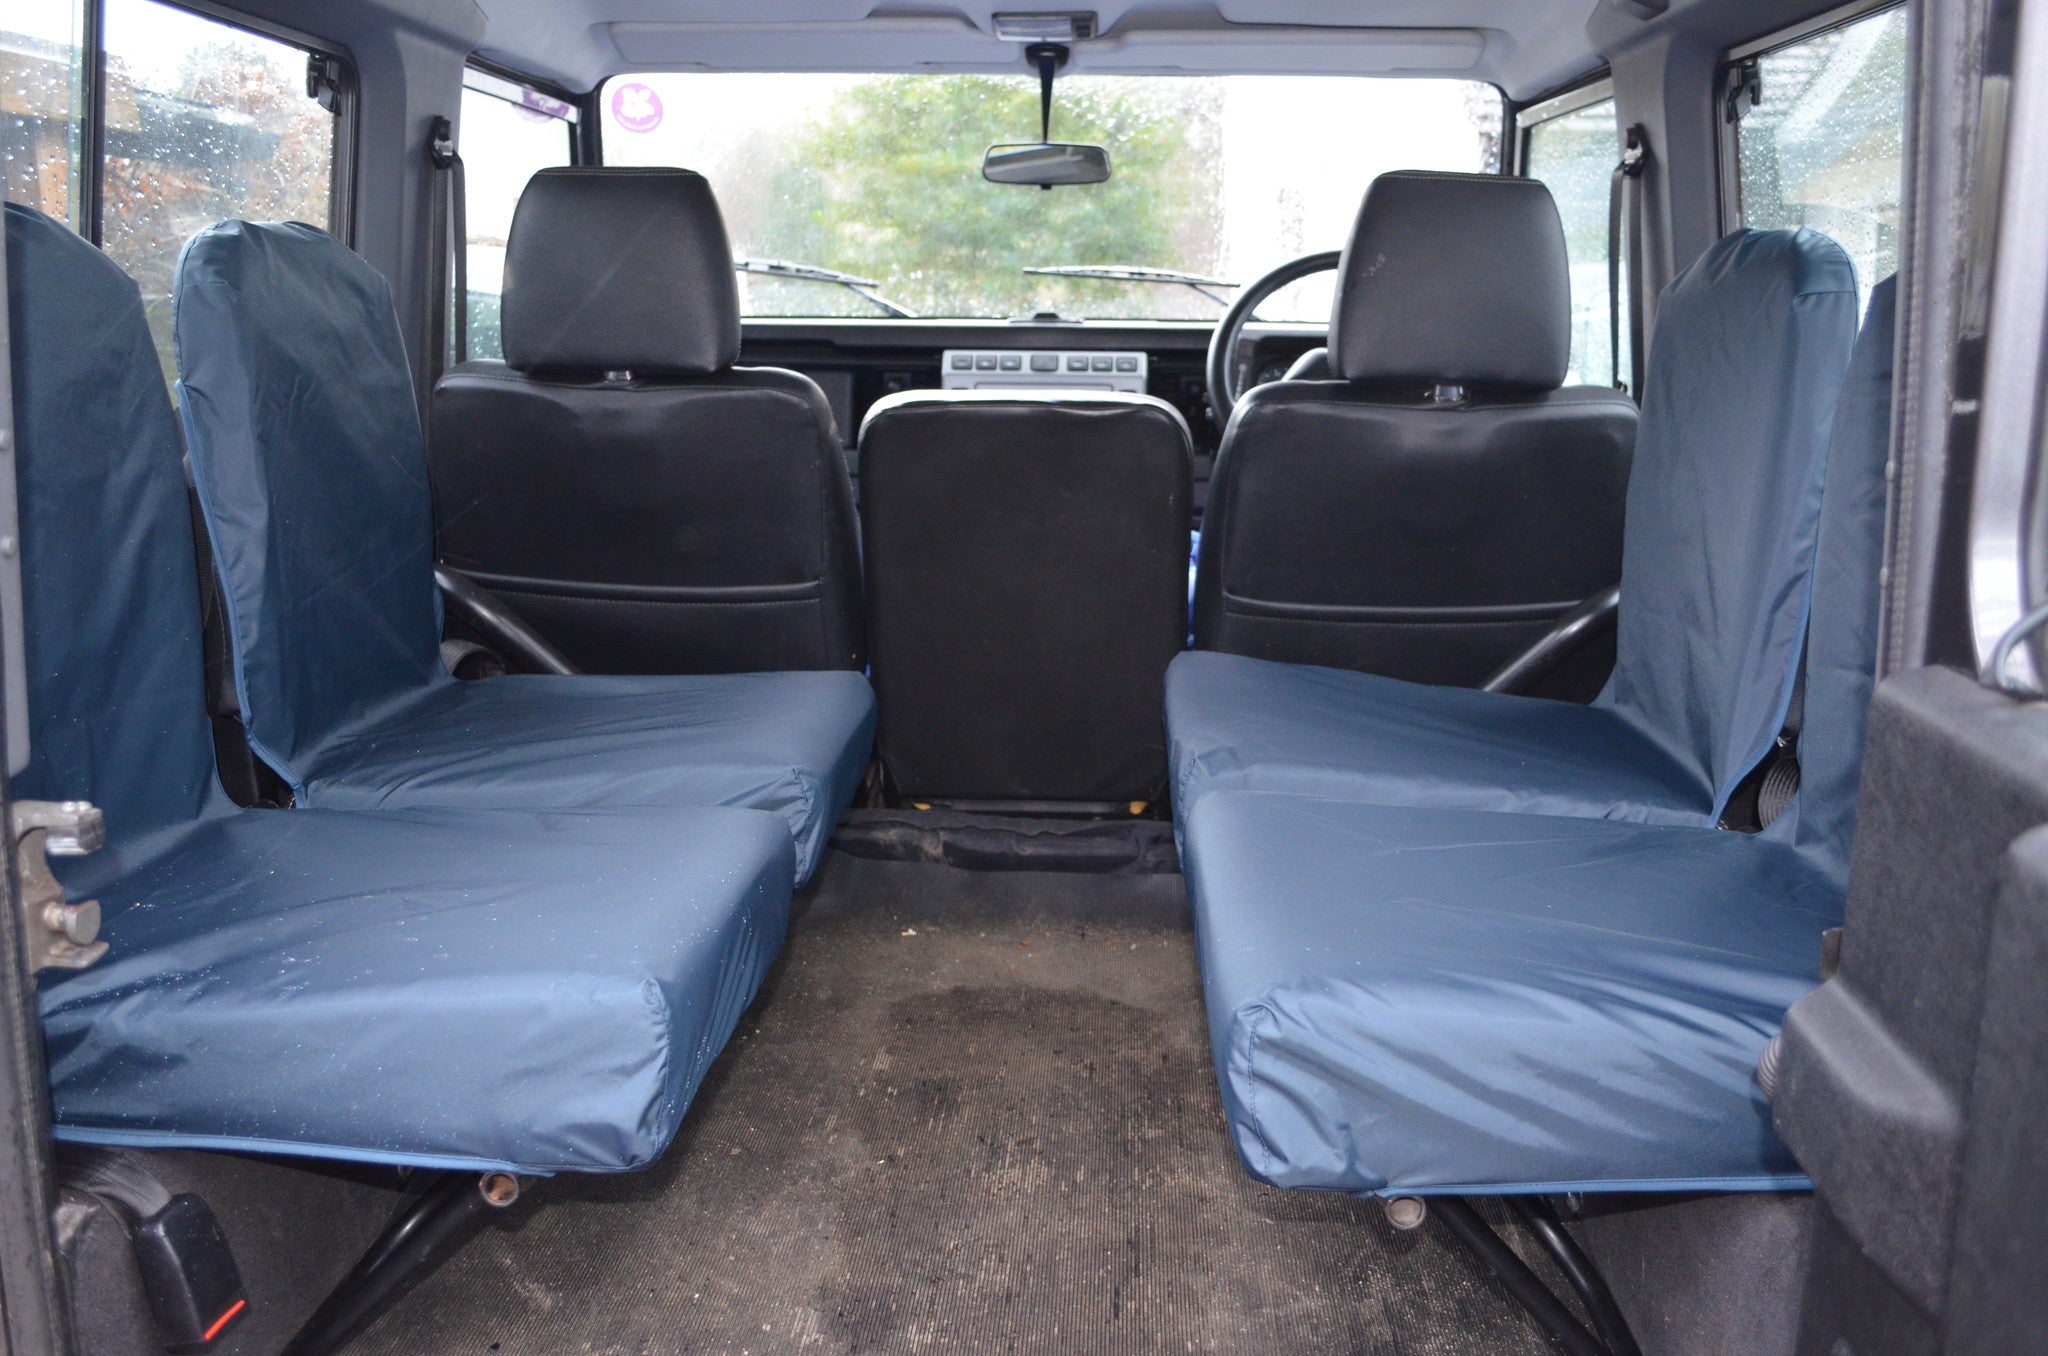 Land Rover Defender 1983 - 2007 Rear Seat Covers Set of 4 Dicky Seats / Navy Blue Turtle Covers Ltd